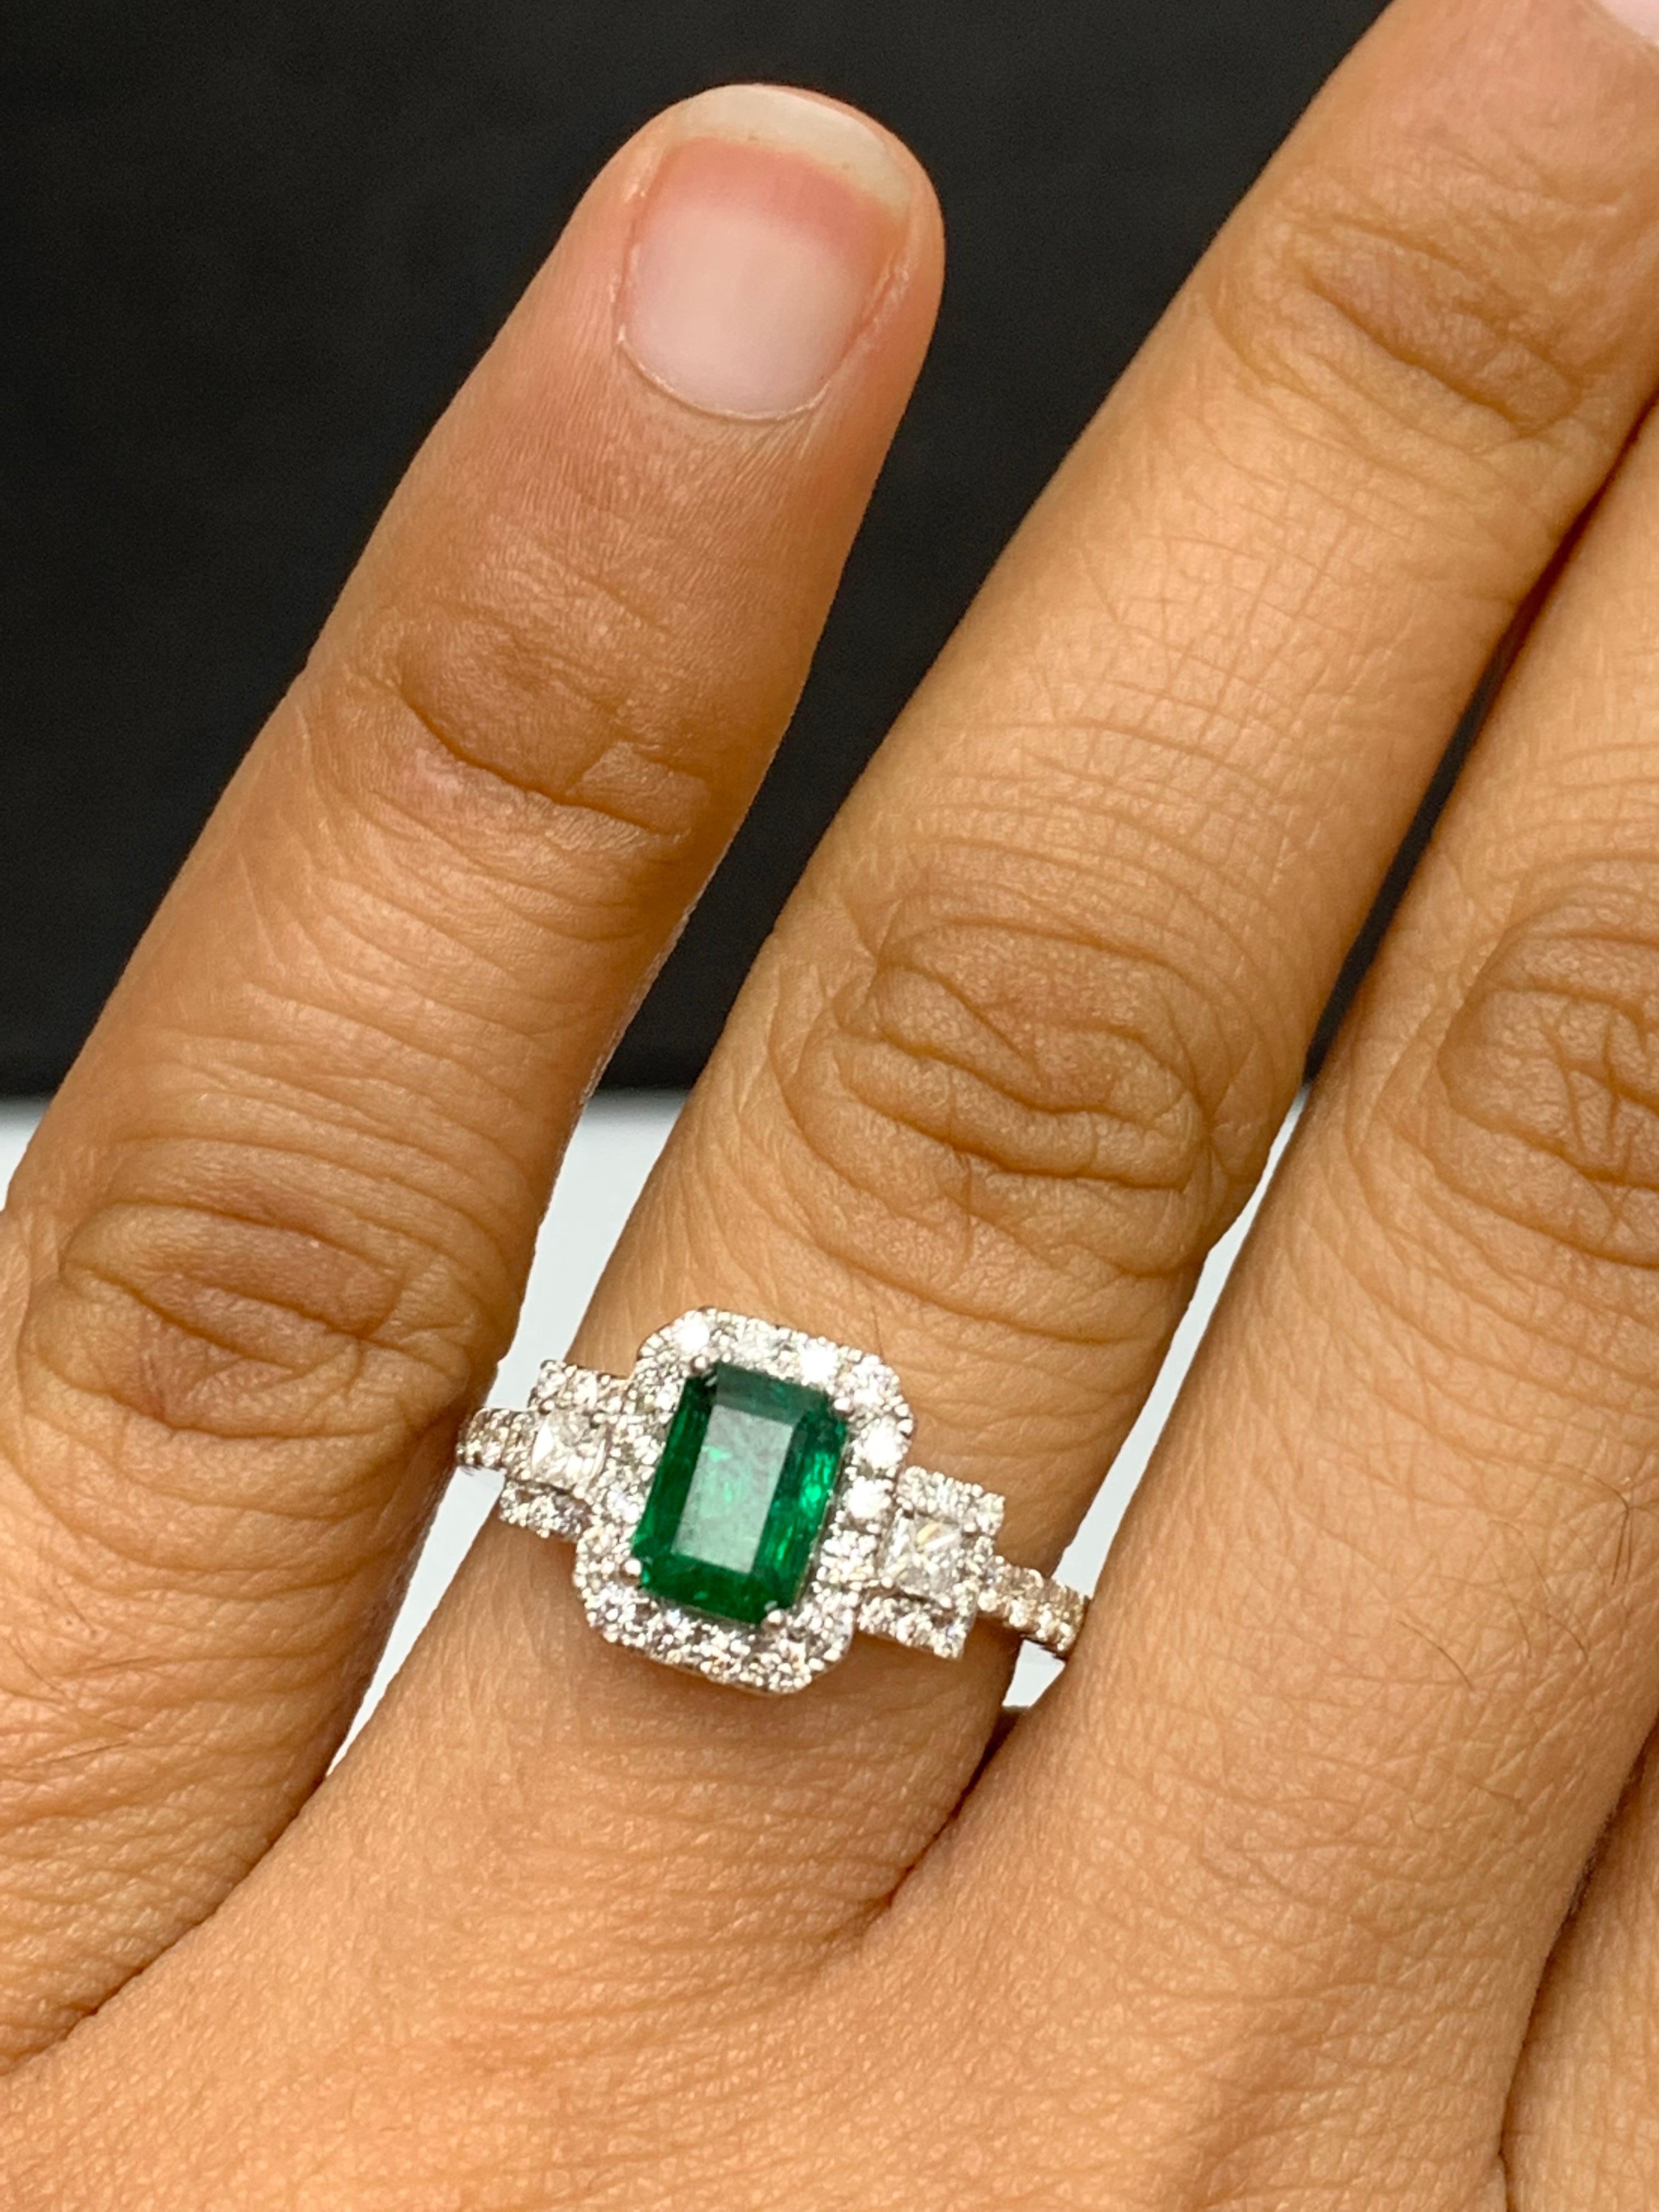 A stunning ring showcasing a rich lush green emerald cut Emerald weighing 1.10 carats surrounded by diamonds on both sides. 42 diamonds on each side weighing 0.57 carats in total. Made in 18K Rose Gold.